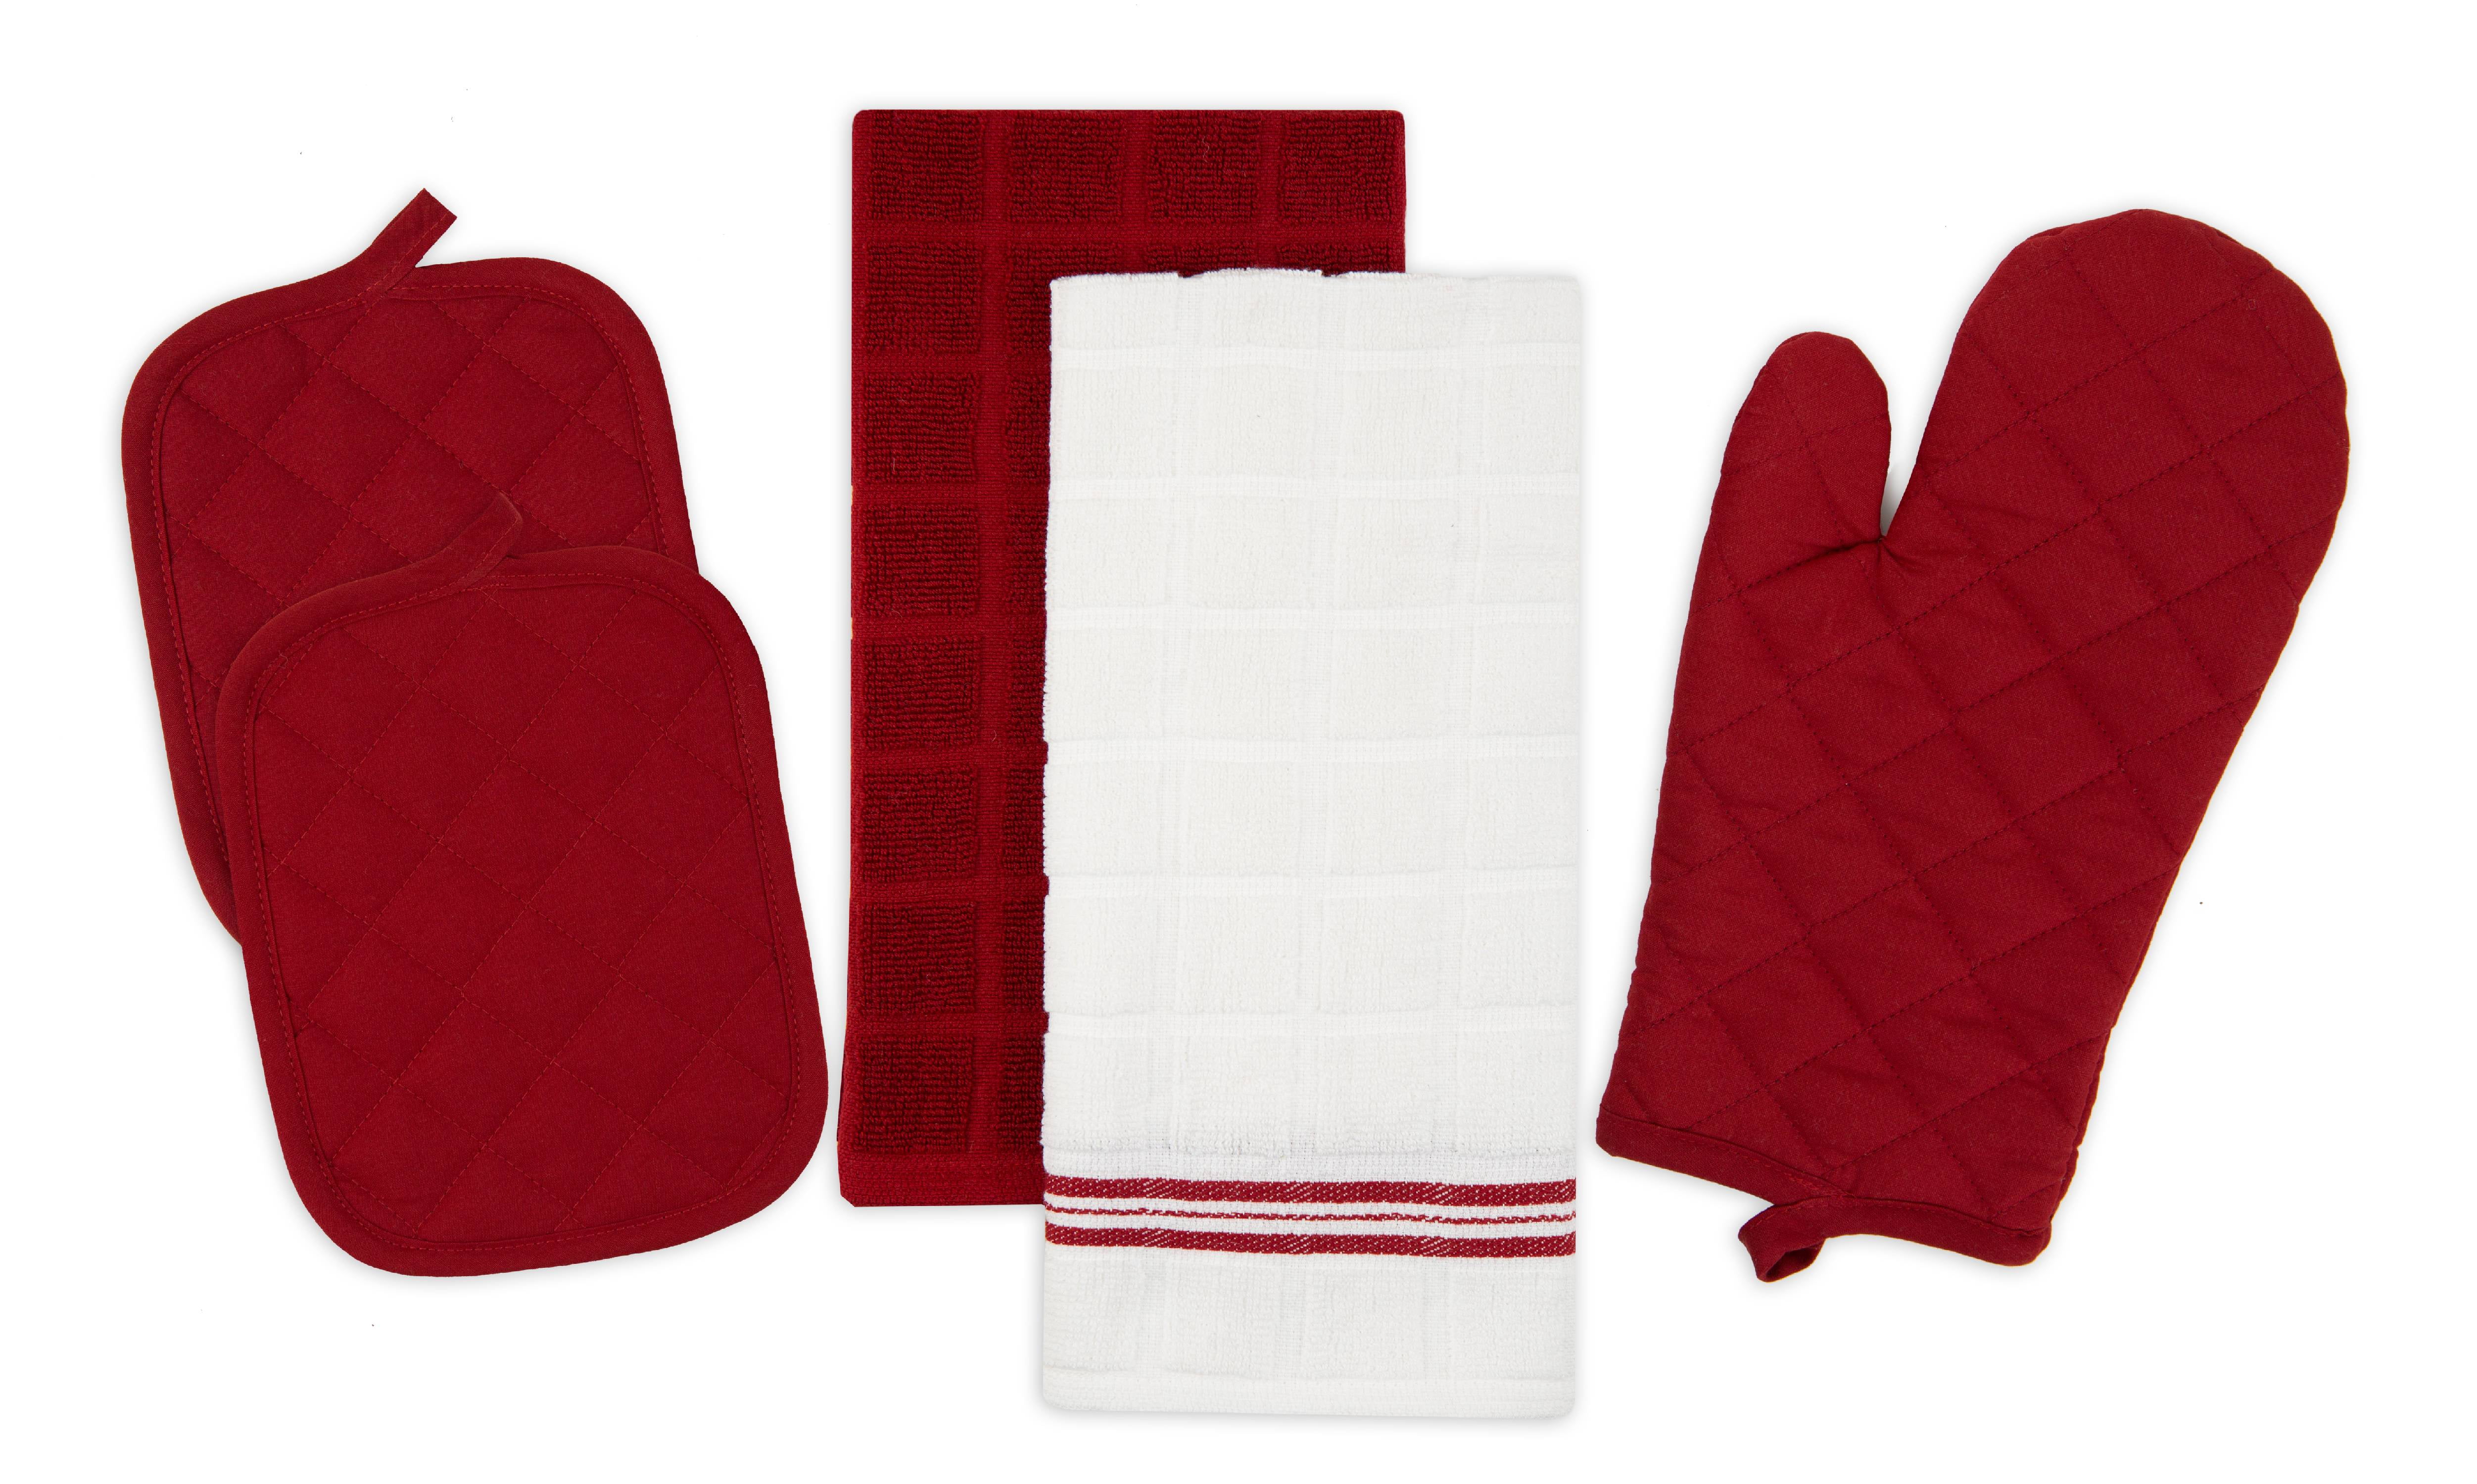 Details about   7 pc KITCHEN SET COFFEE BISTRO,MS 2 POT HOLDERS,1 OVEN MITT & 2 TOWELS 2 RAGS 